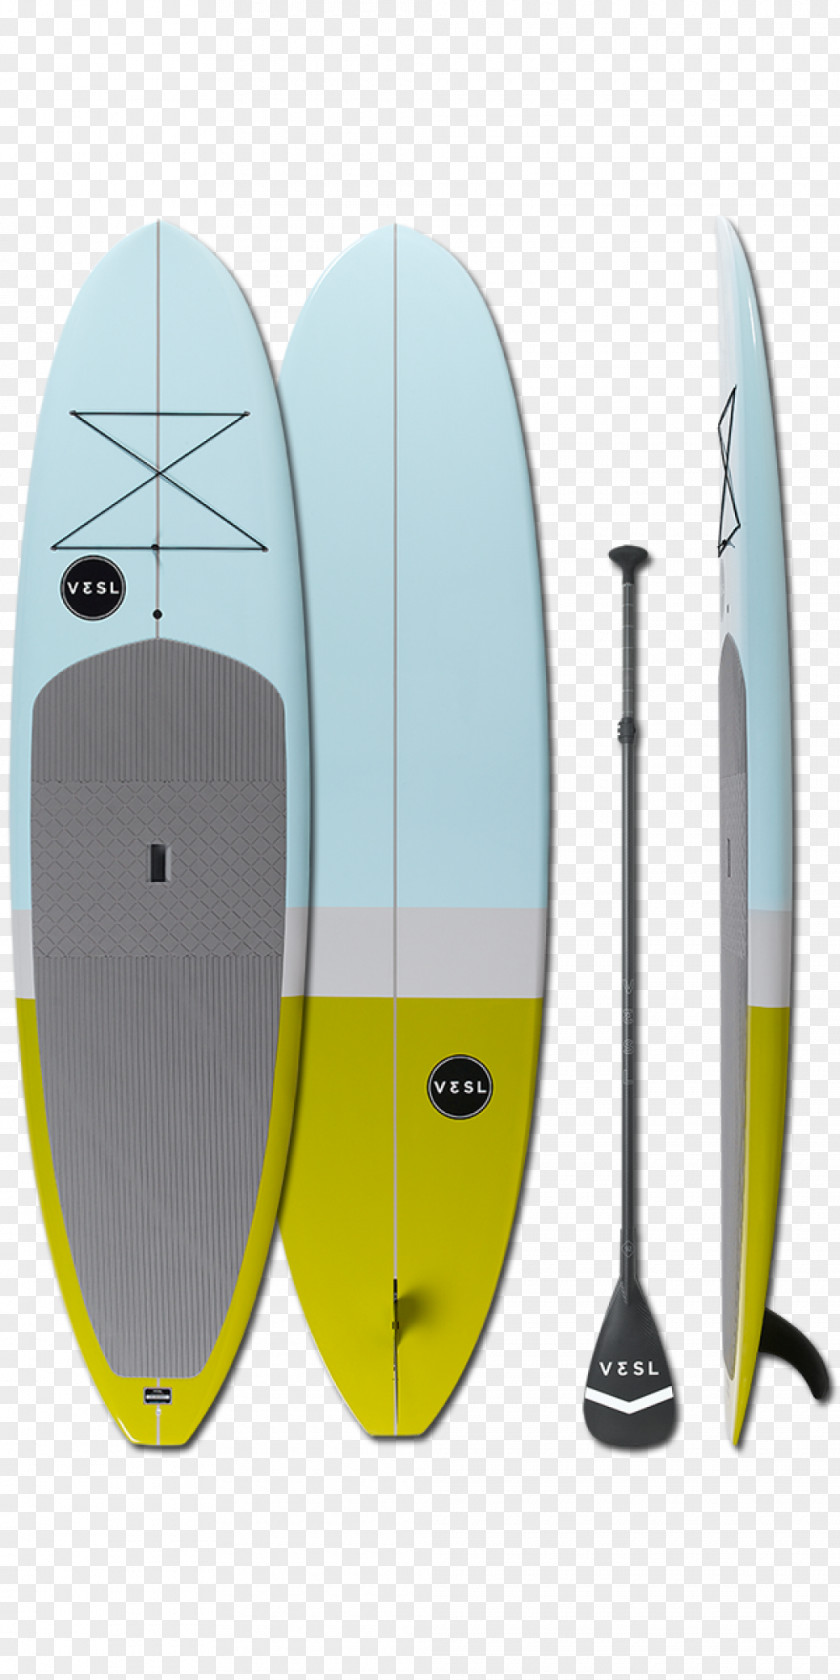 Paddle Surfboard Standup Paddleboarding Surfing PNG